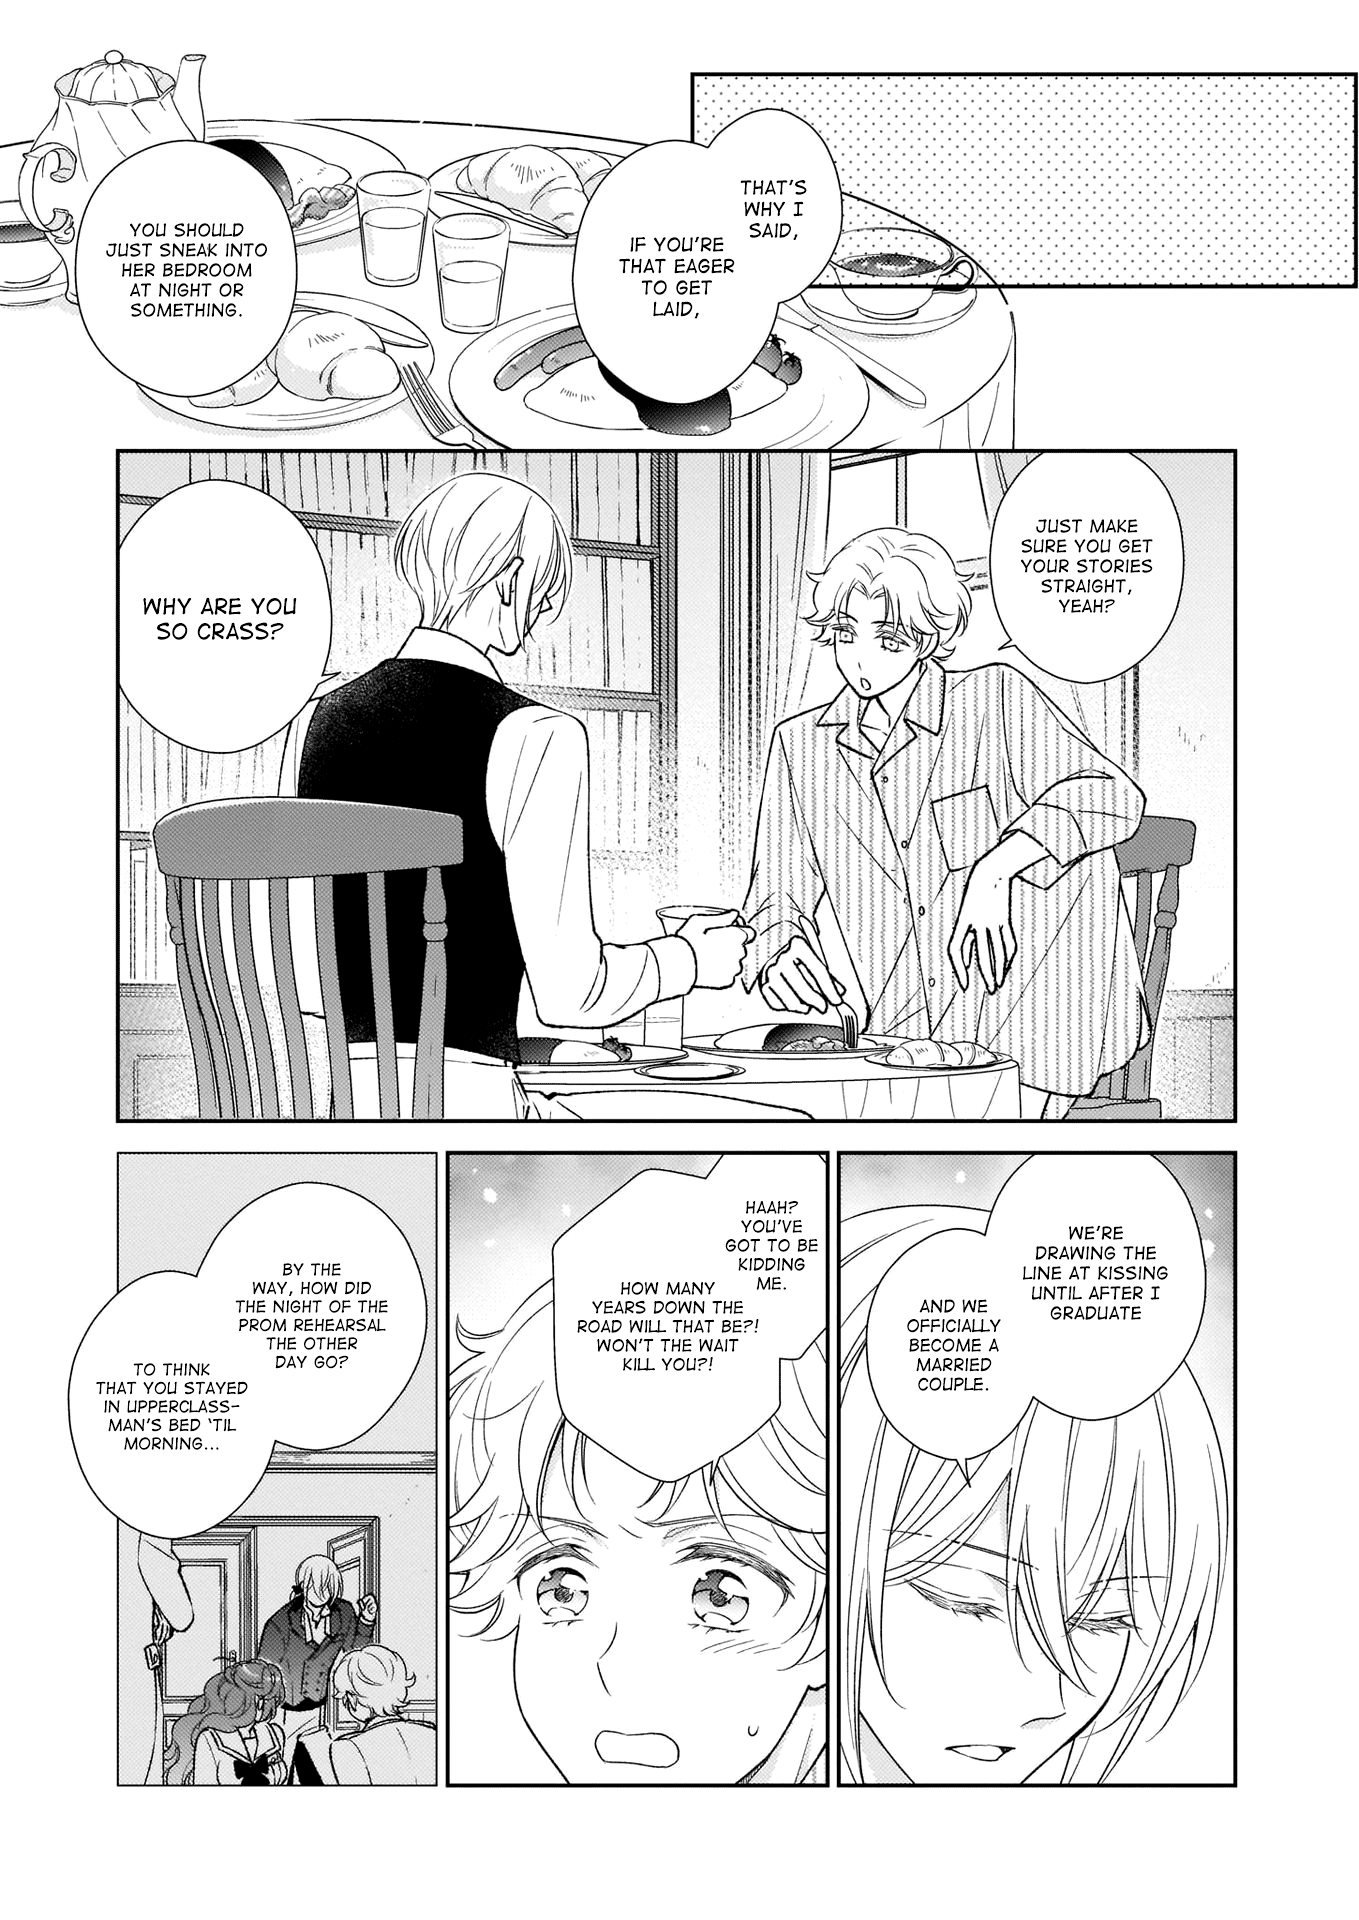 The Result Of Being Reincarnated Is Having A Master-Servant Relationship With The Yandere Love Interest - Page 3